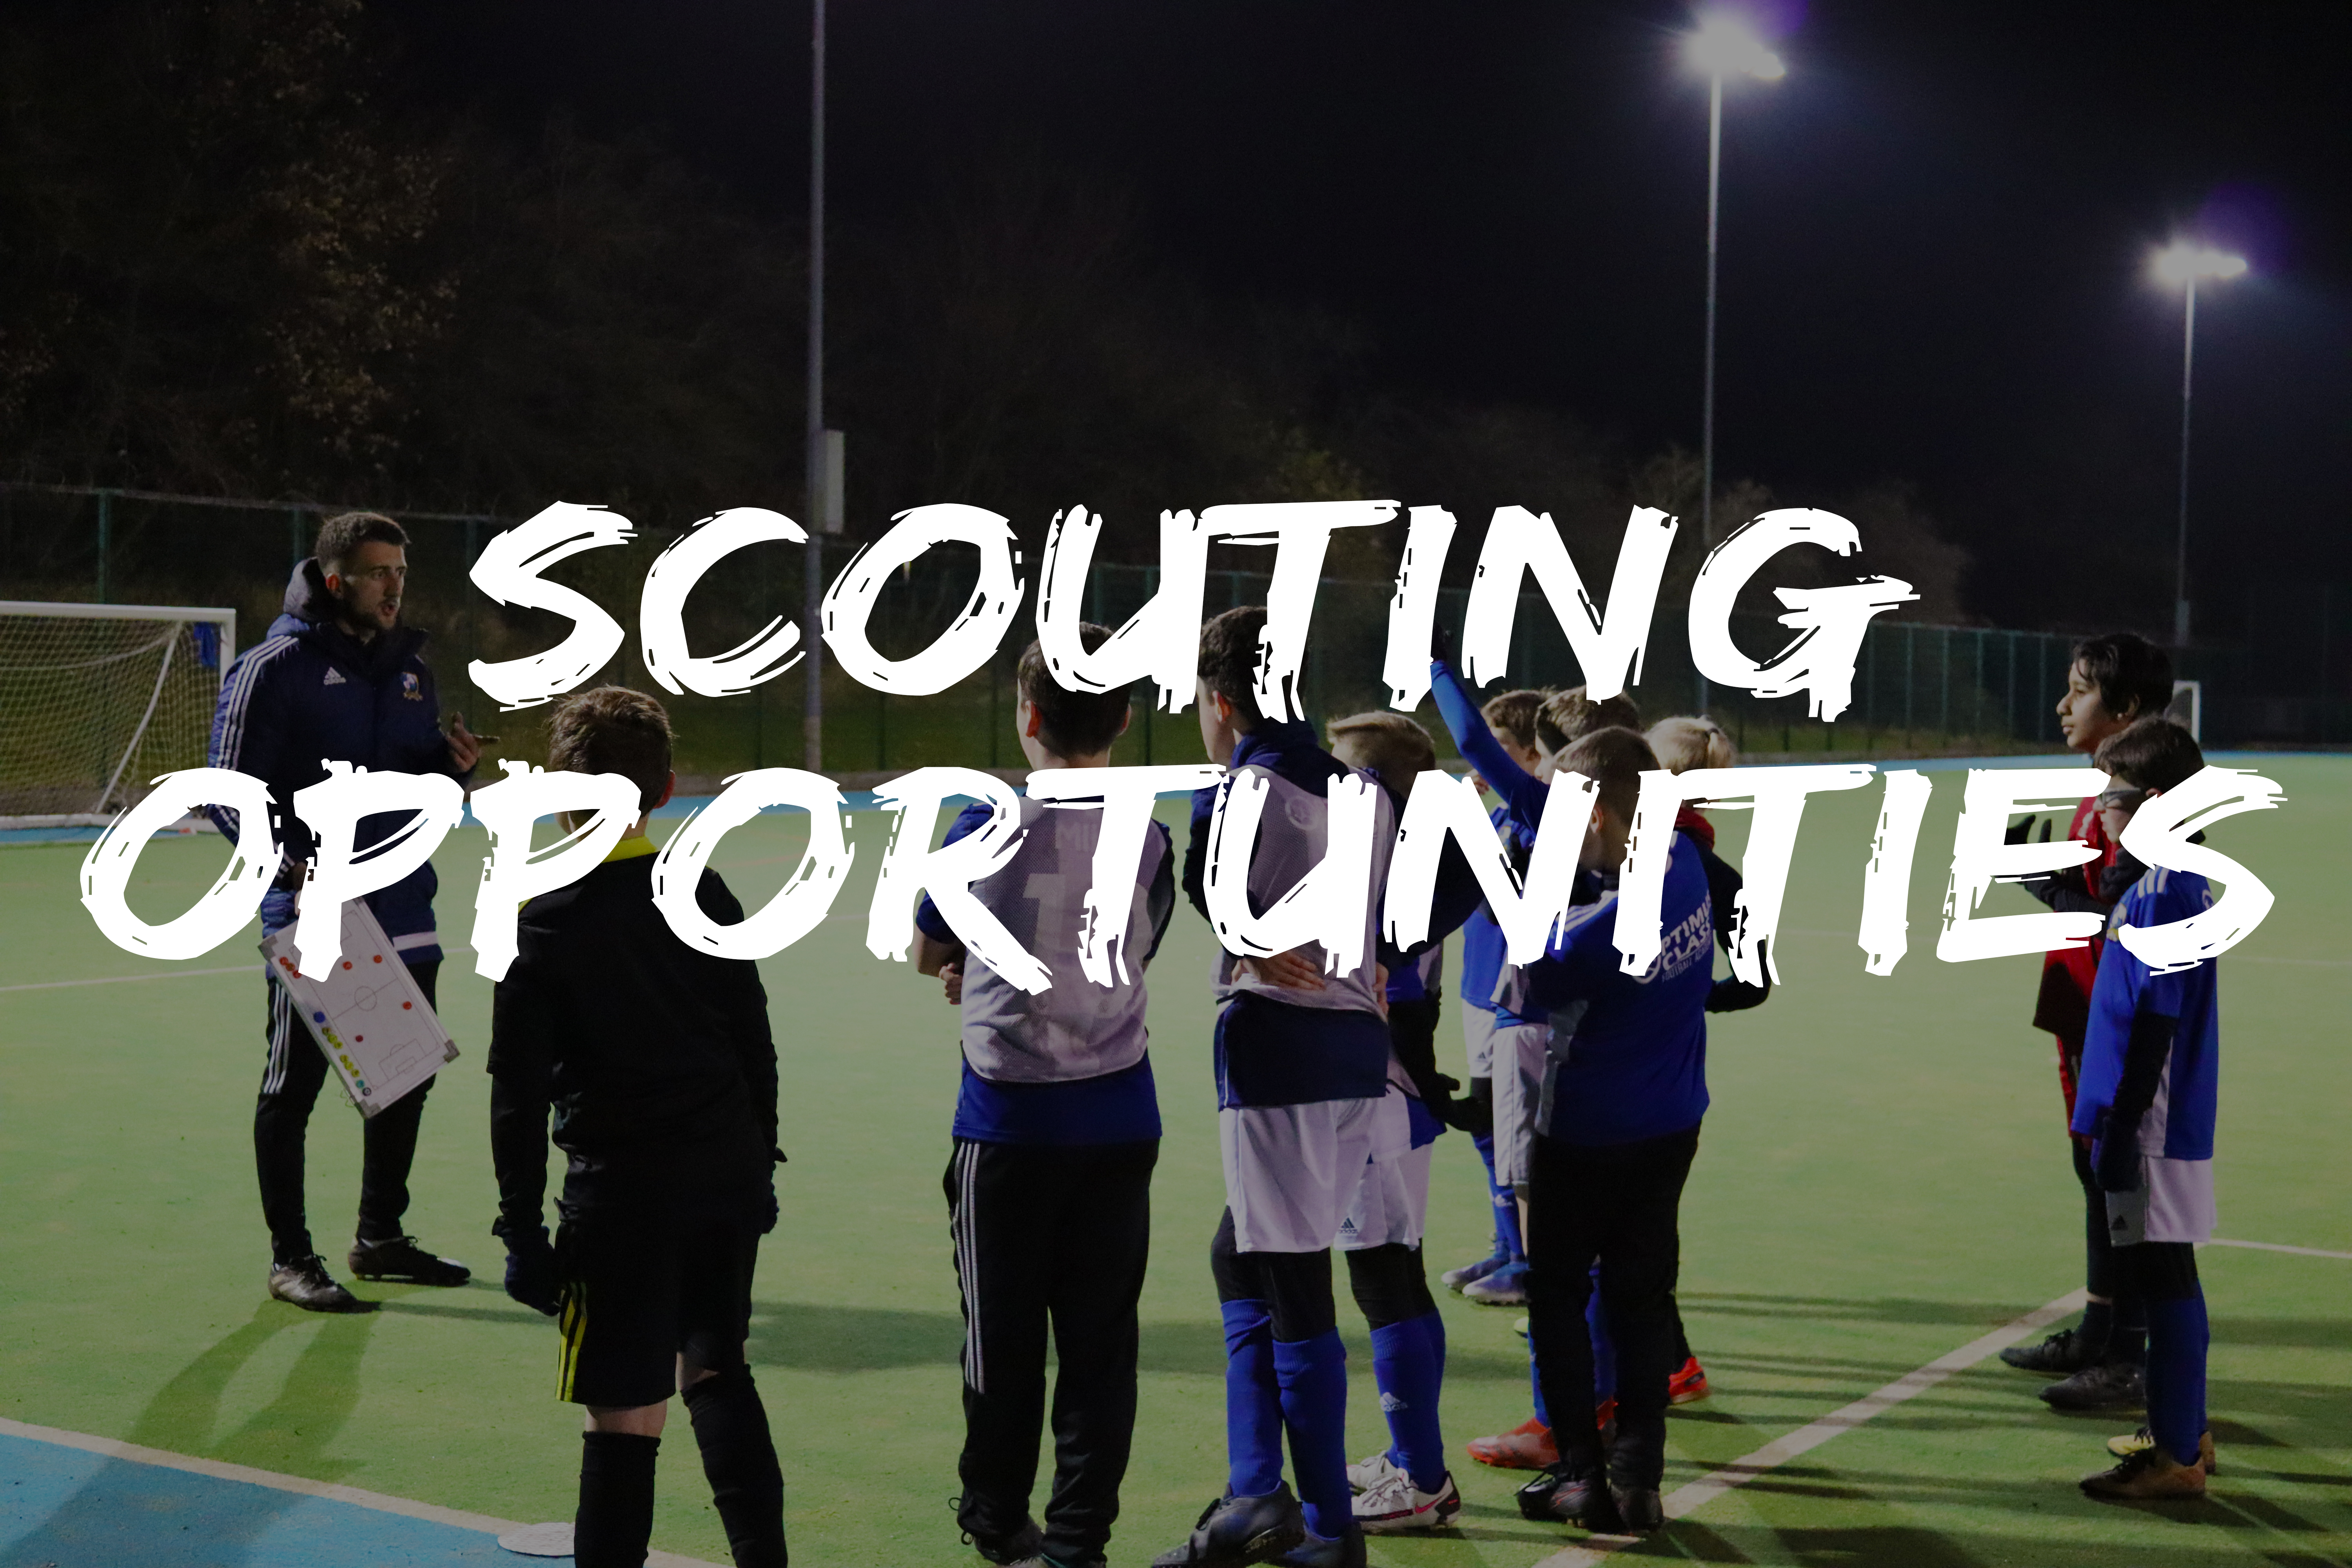 Scouting opportunities